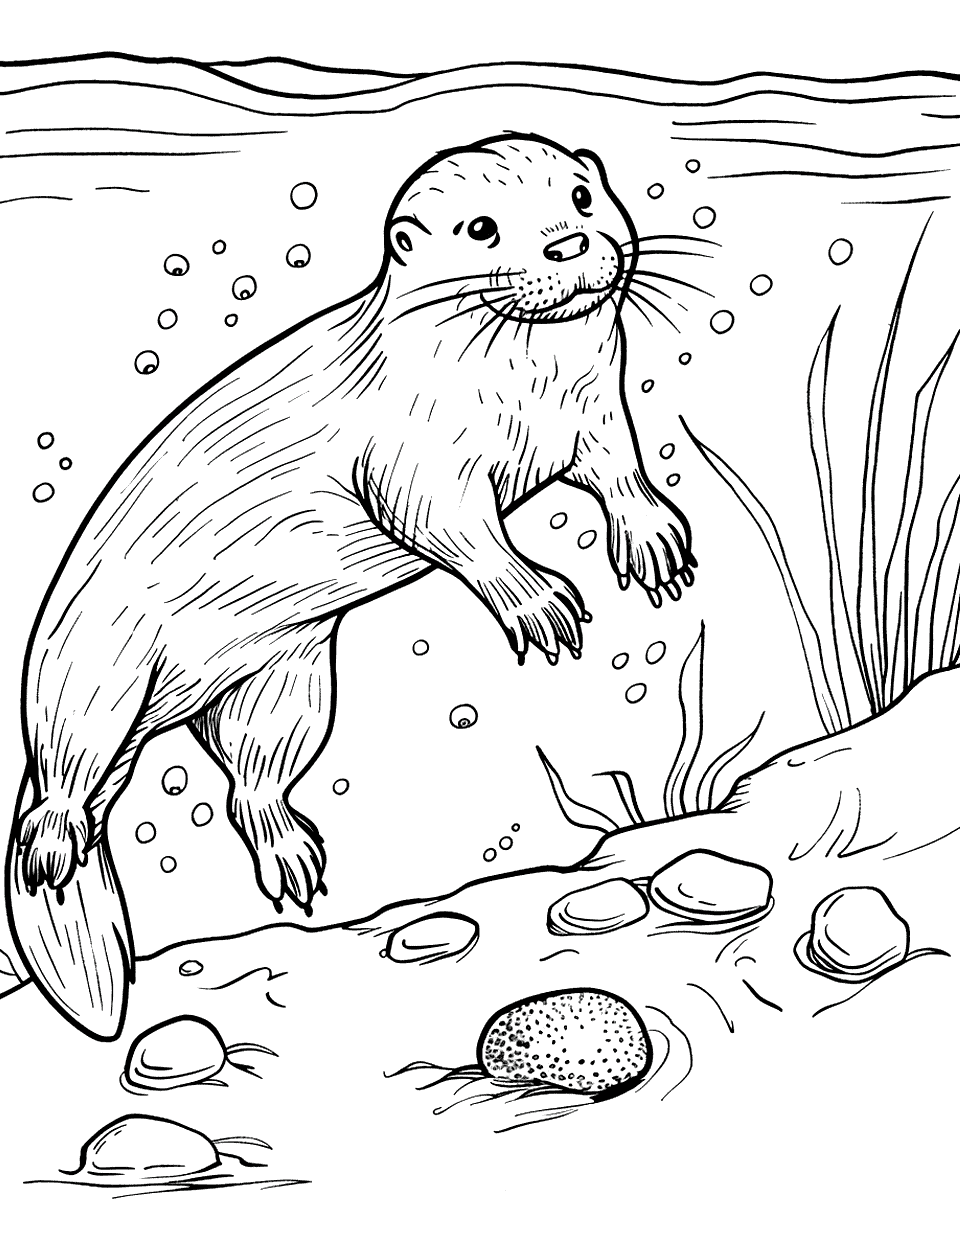 Otter Diving for Pebbles Coloring Page - An otter underwater, reaching for pebbles on the riverbed.